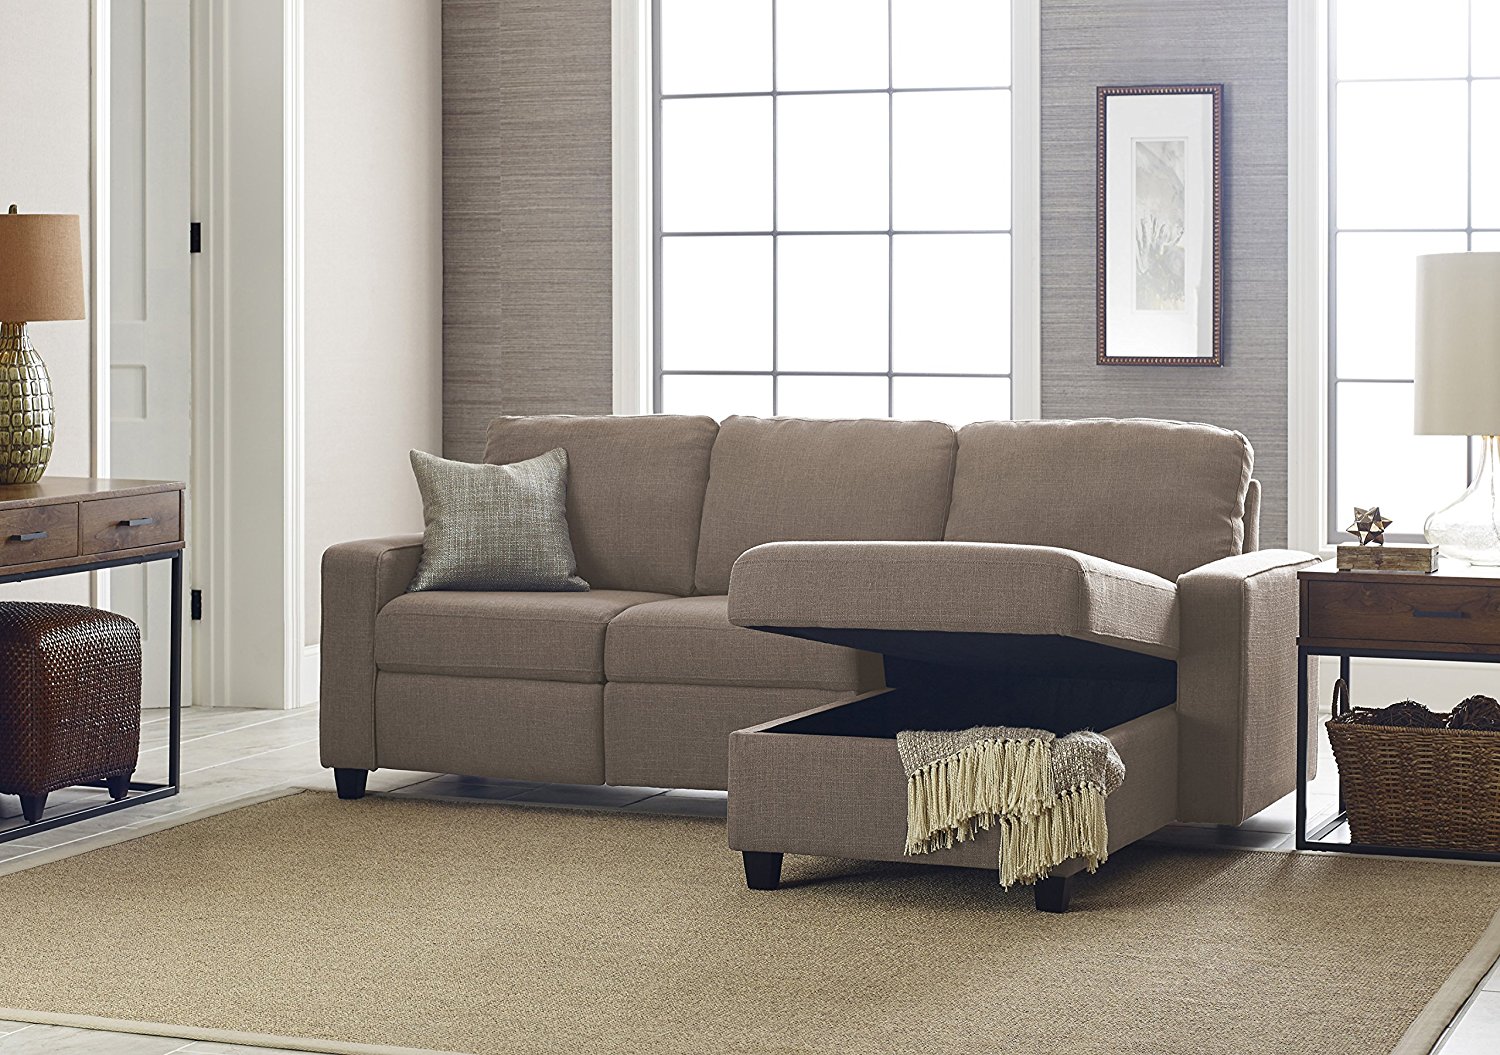  Serta Palisades Reclining Sectional with Right Storage Chaise